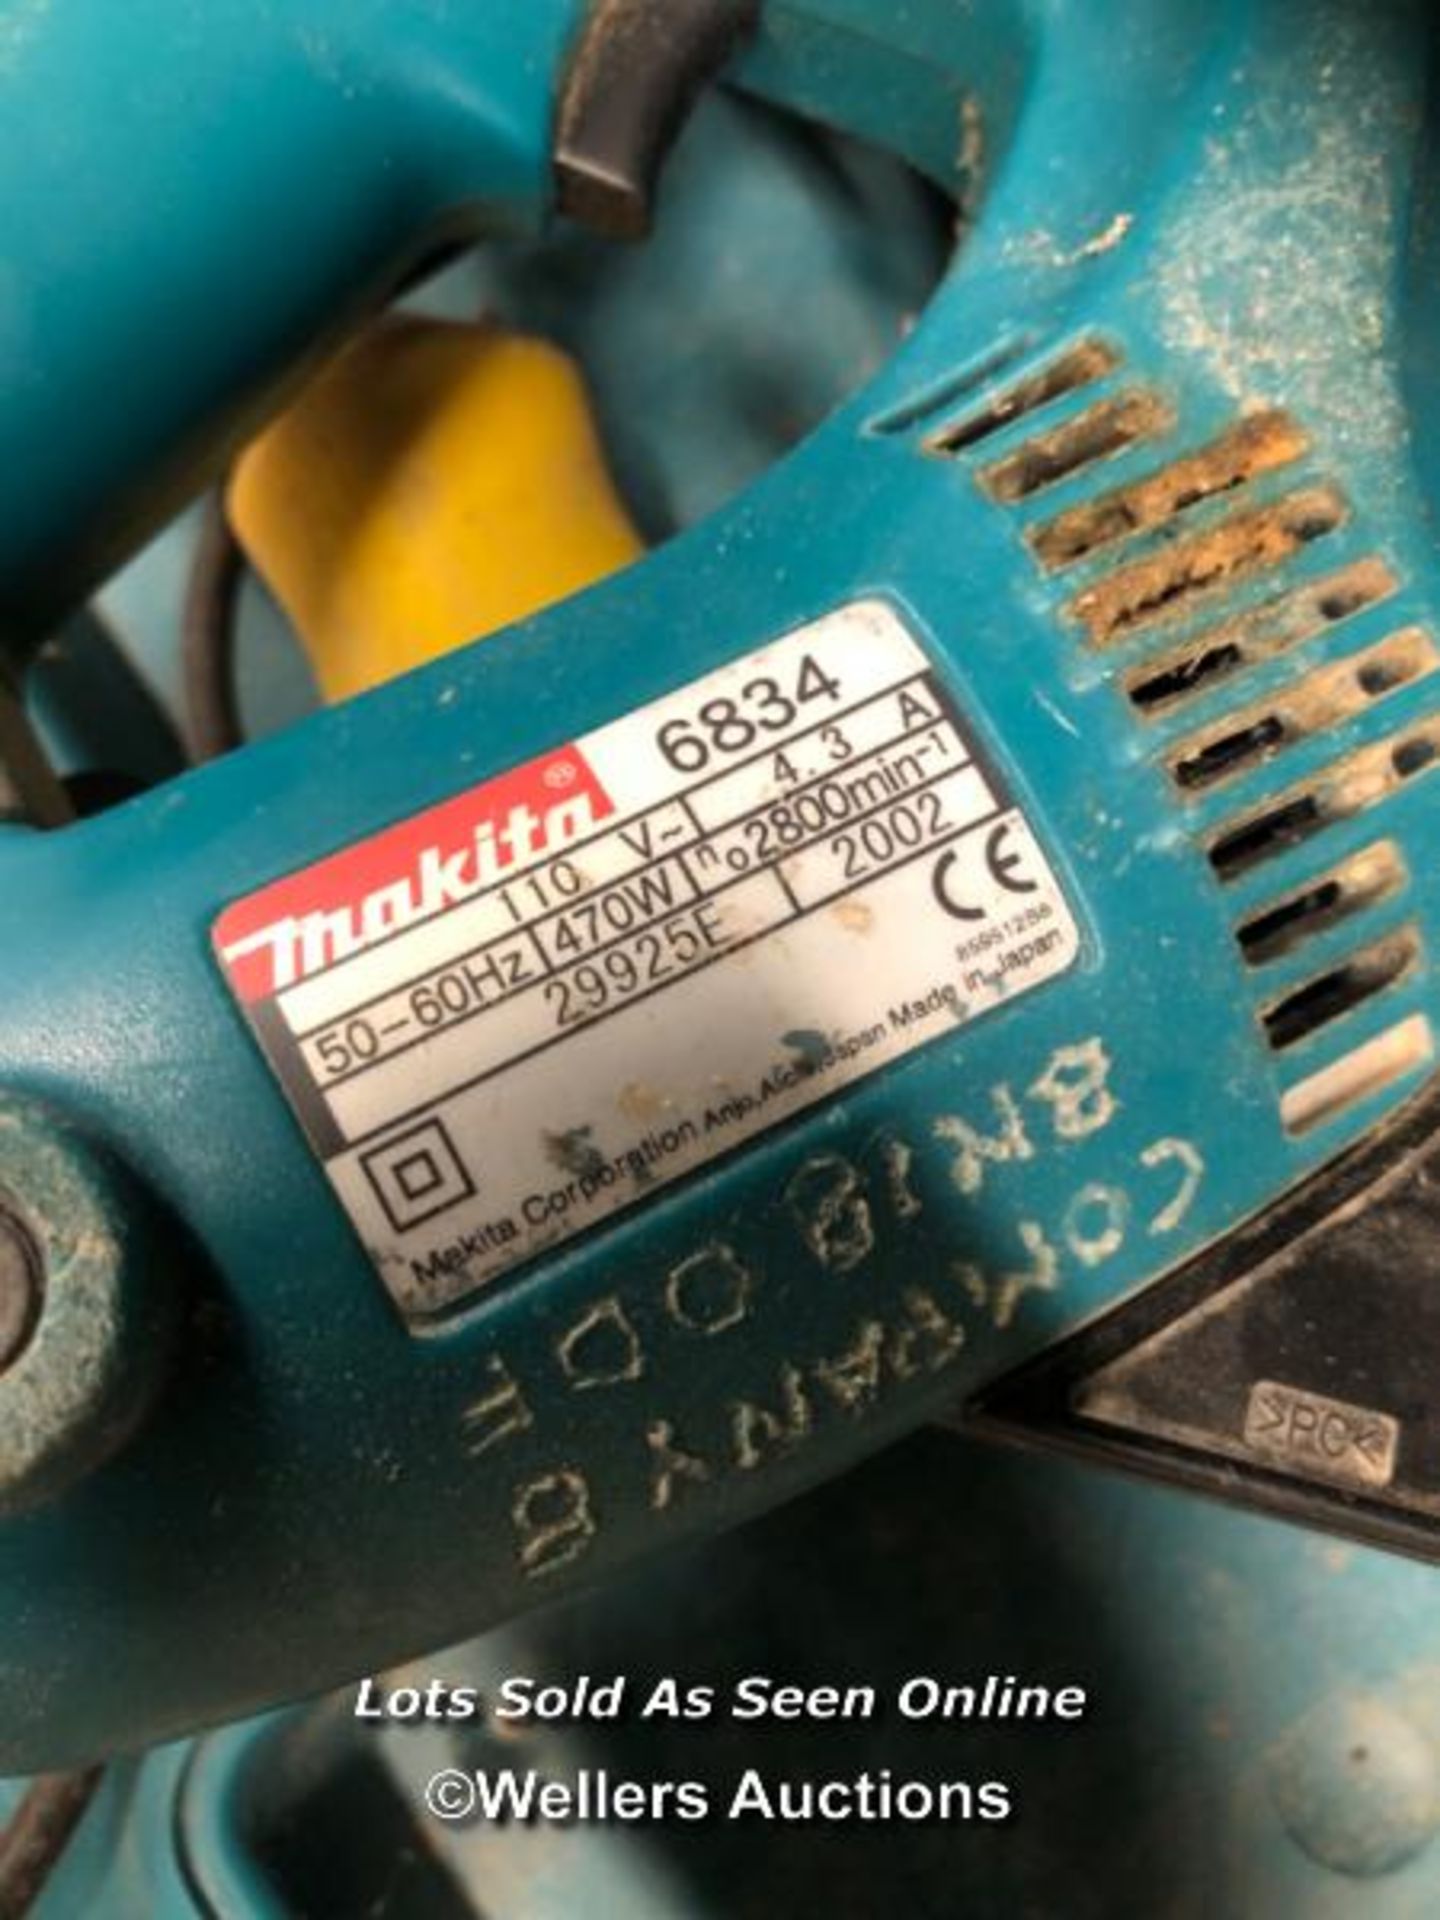 MAKITA 6834 AUTO FEED SCREWDRIVER, IN CASE - Image 3 of 3